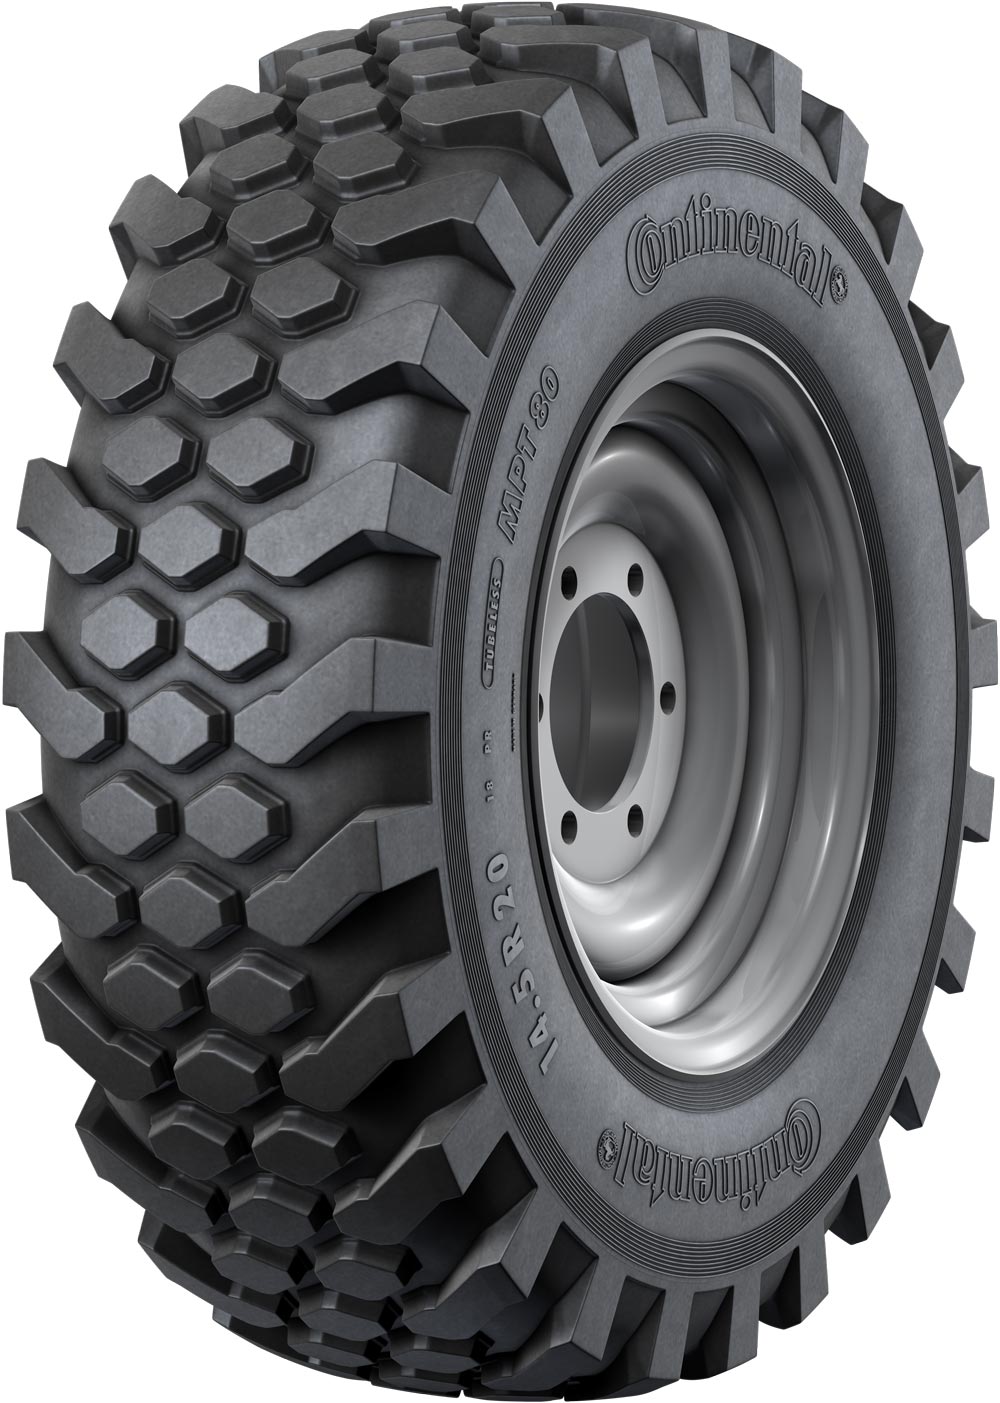 product_type-industrial_tires CONTINENTAL MPT80 22PR TL 14.5 R20 J